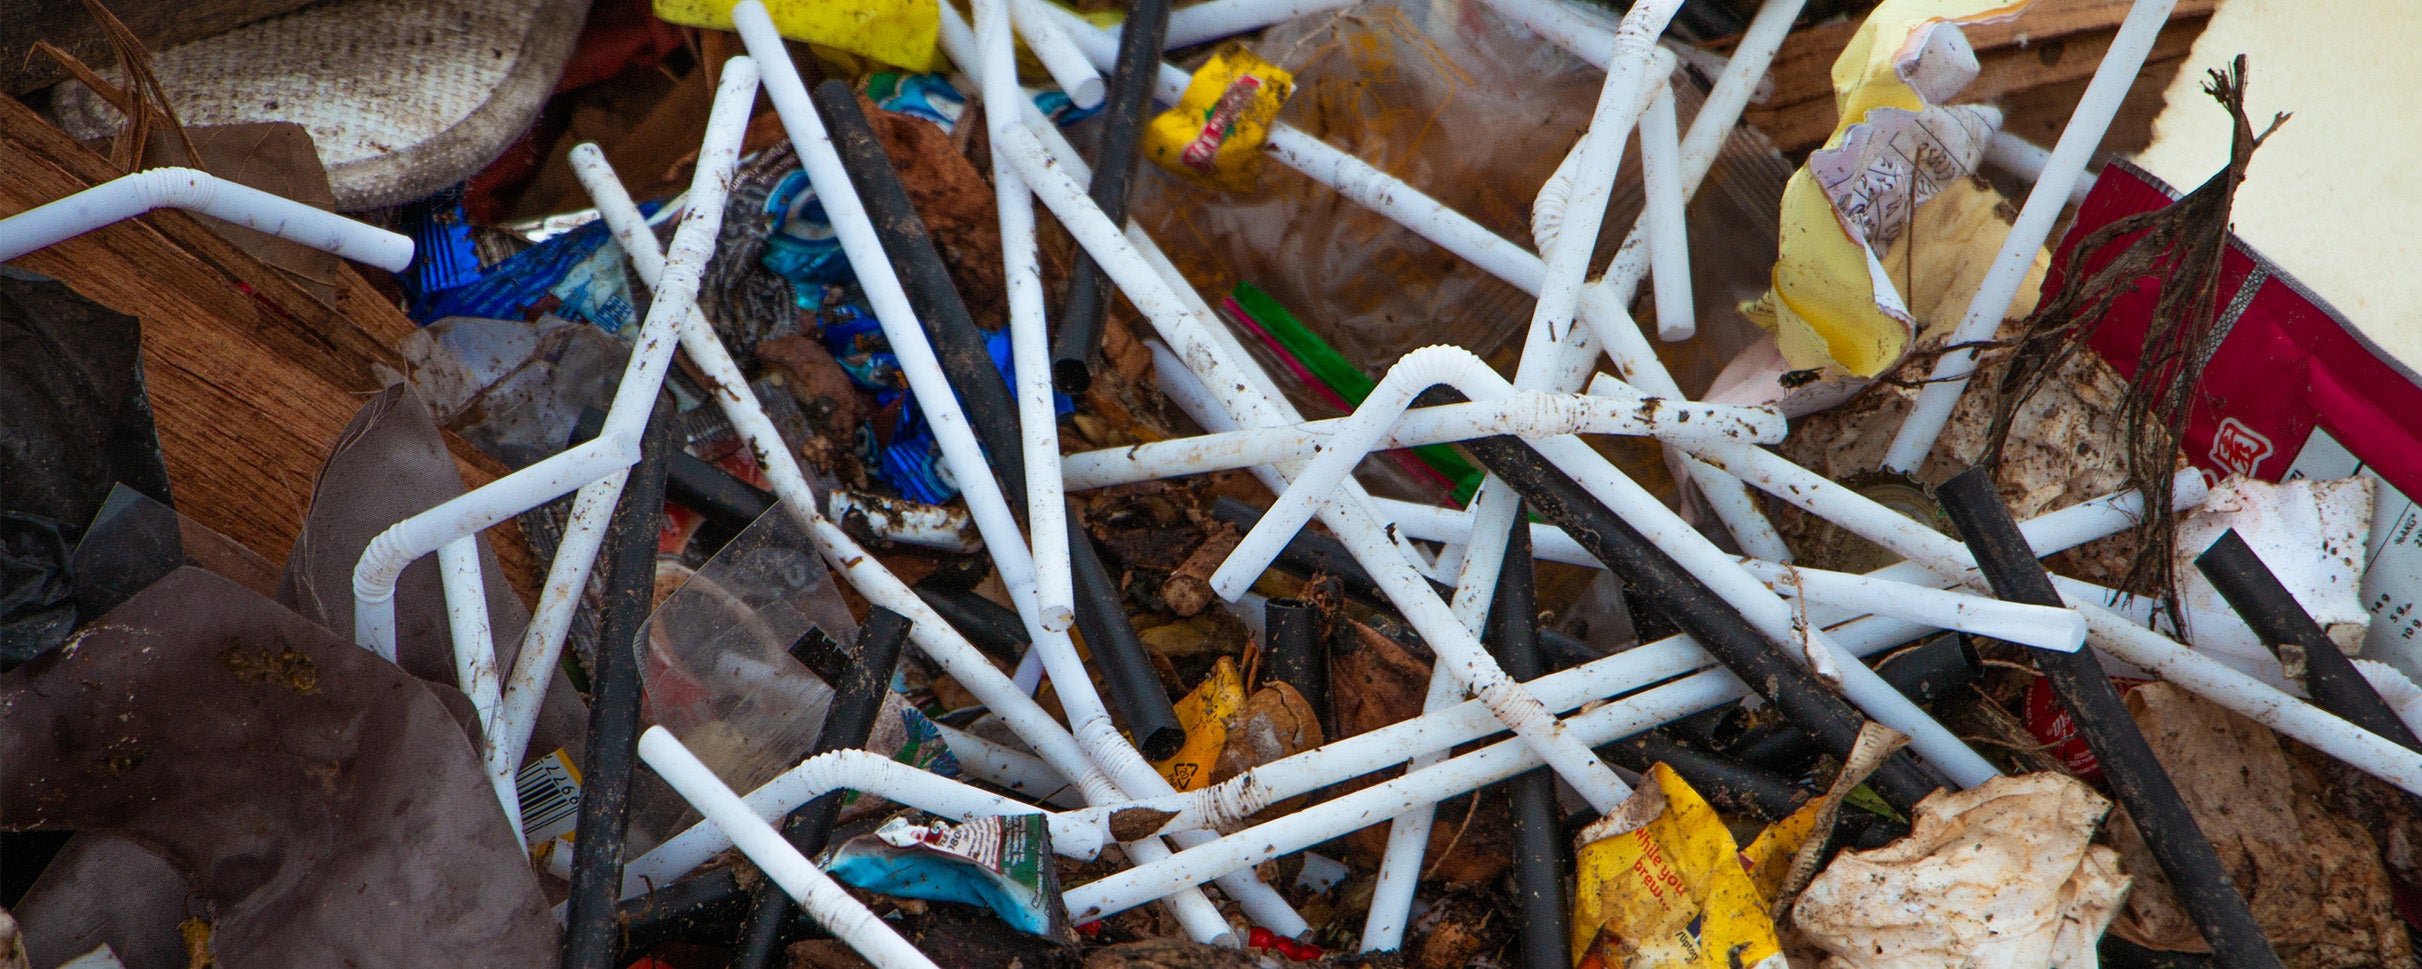 Discarded plastic straws at the Suwung Landfill on Bali. 